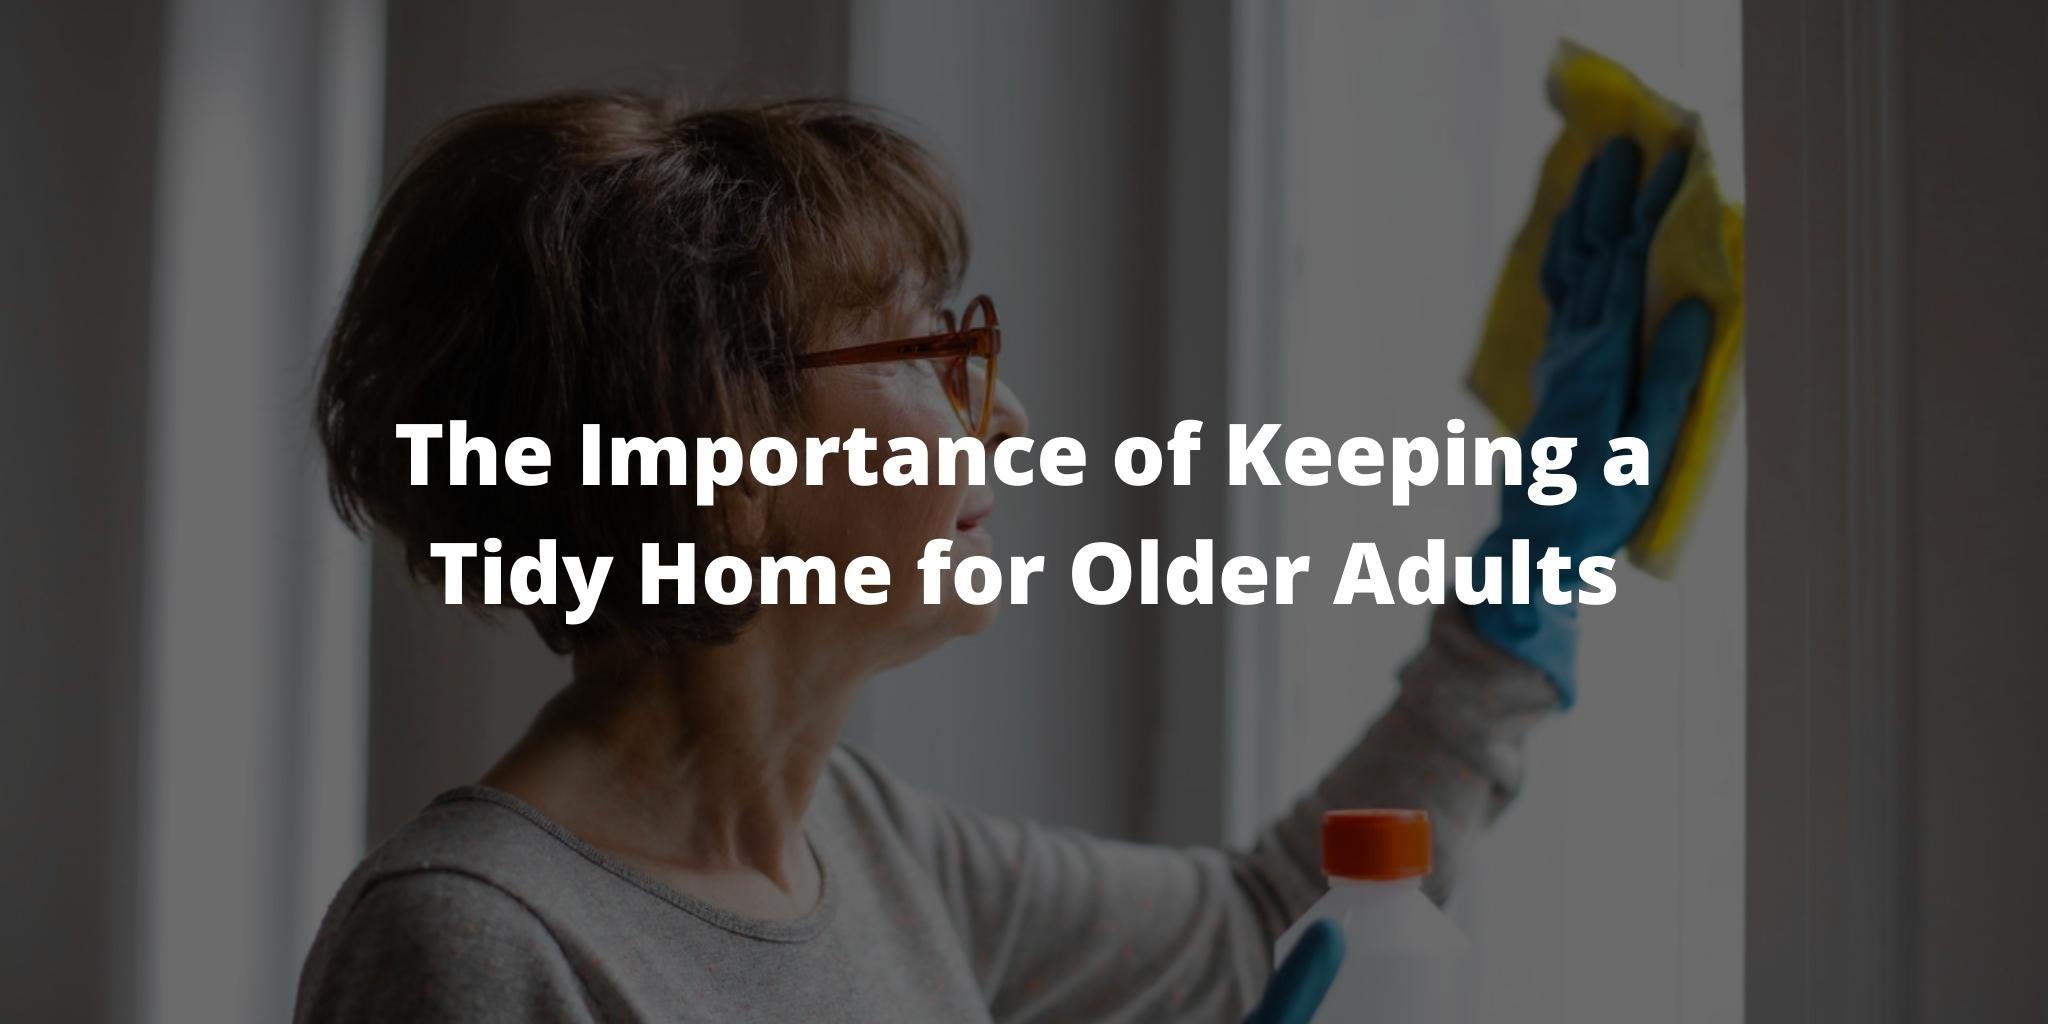 The Importance of Keeping a Tidy Home for Older Adults